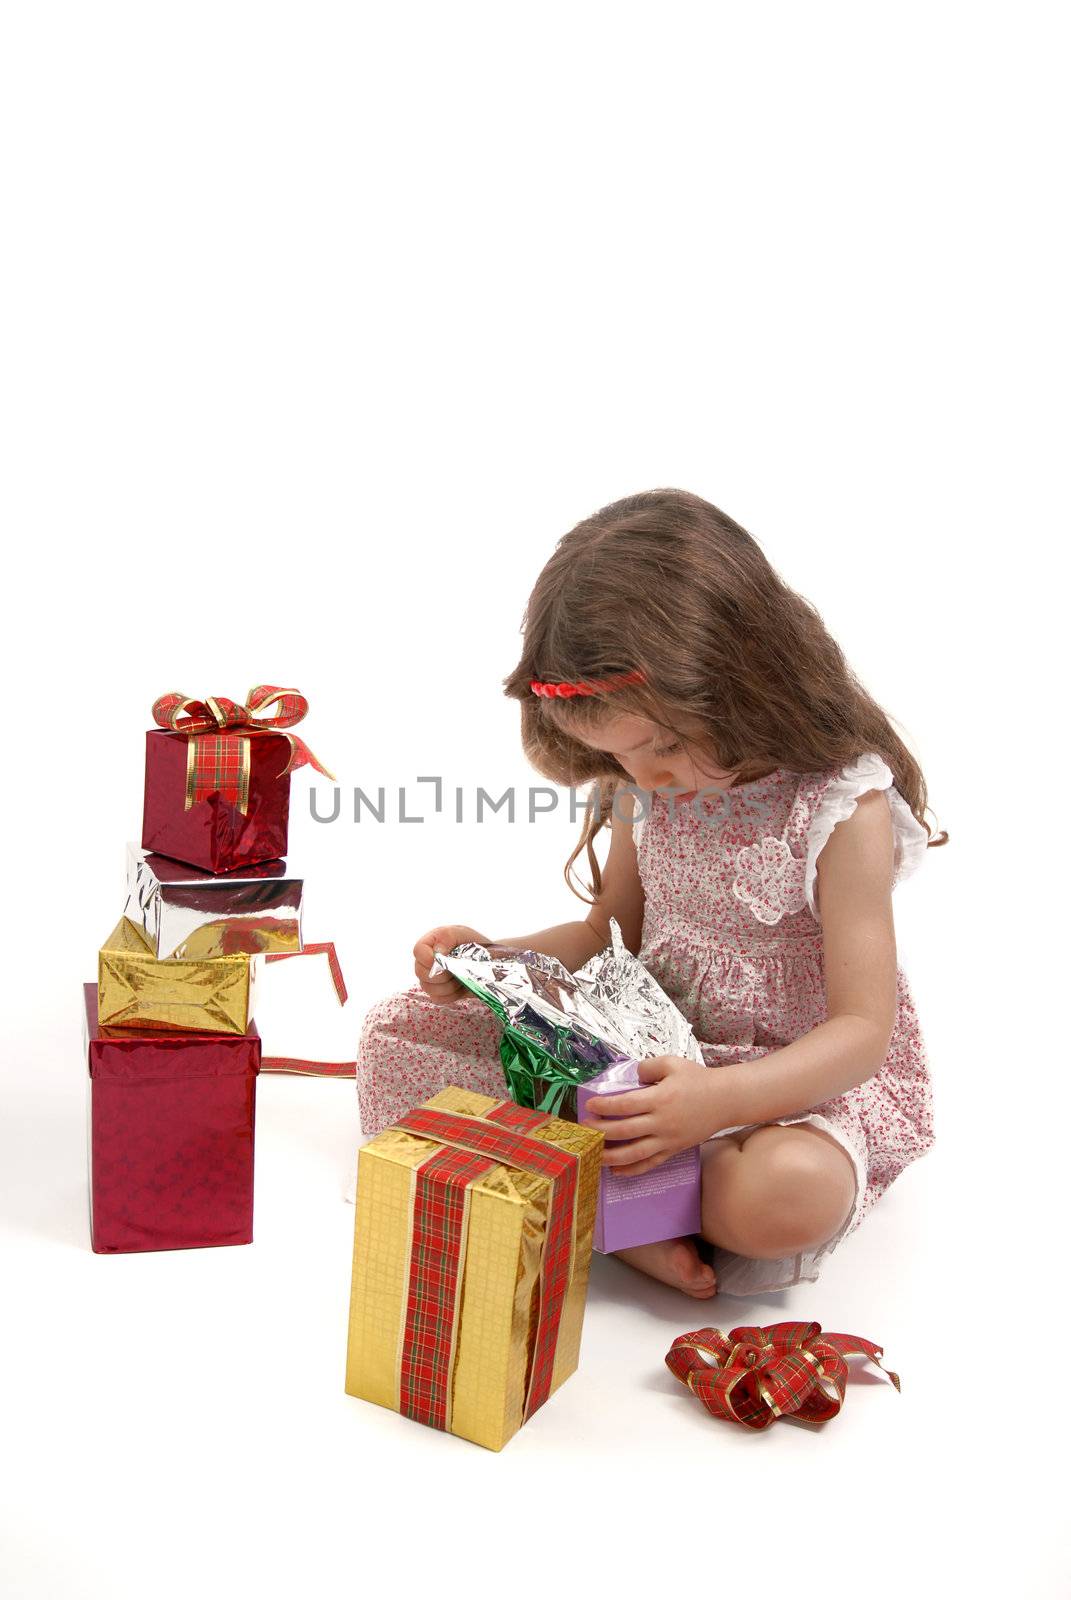 Little girl opening her Christmas presents by cienpies